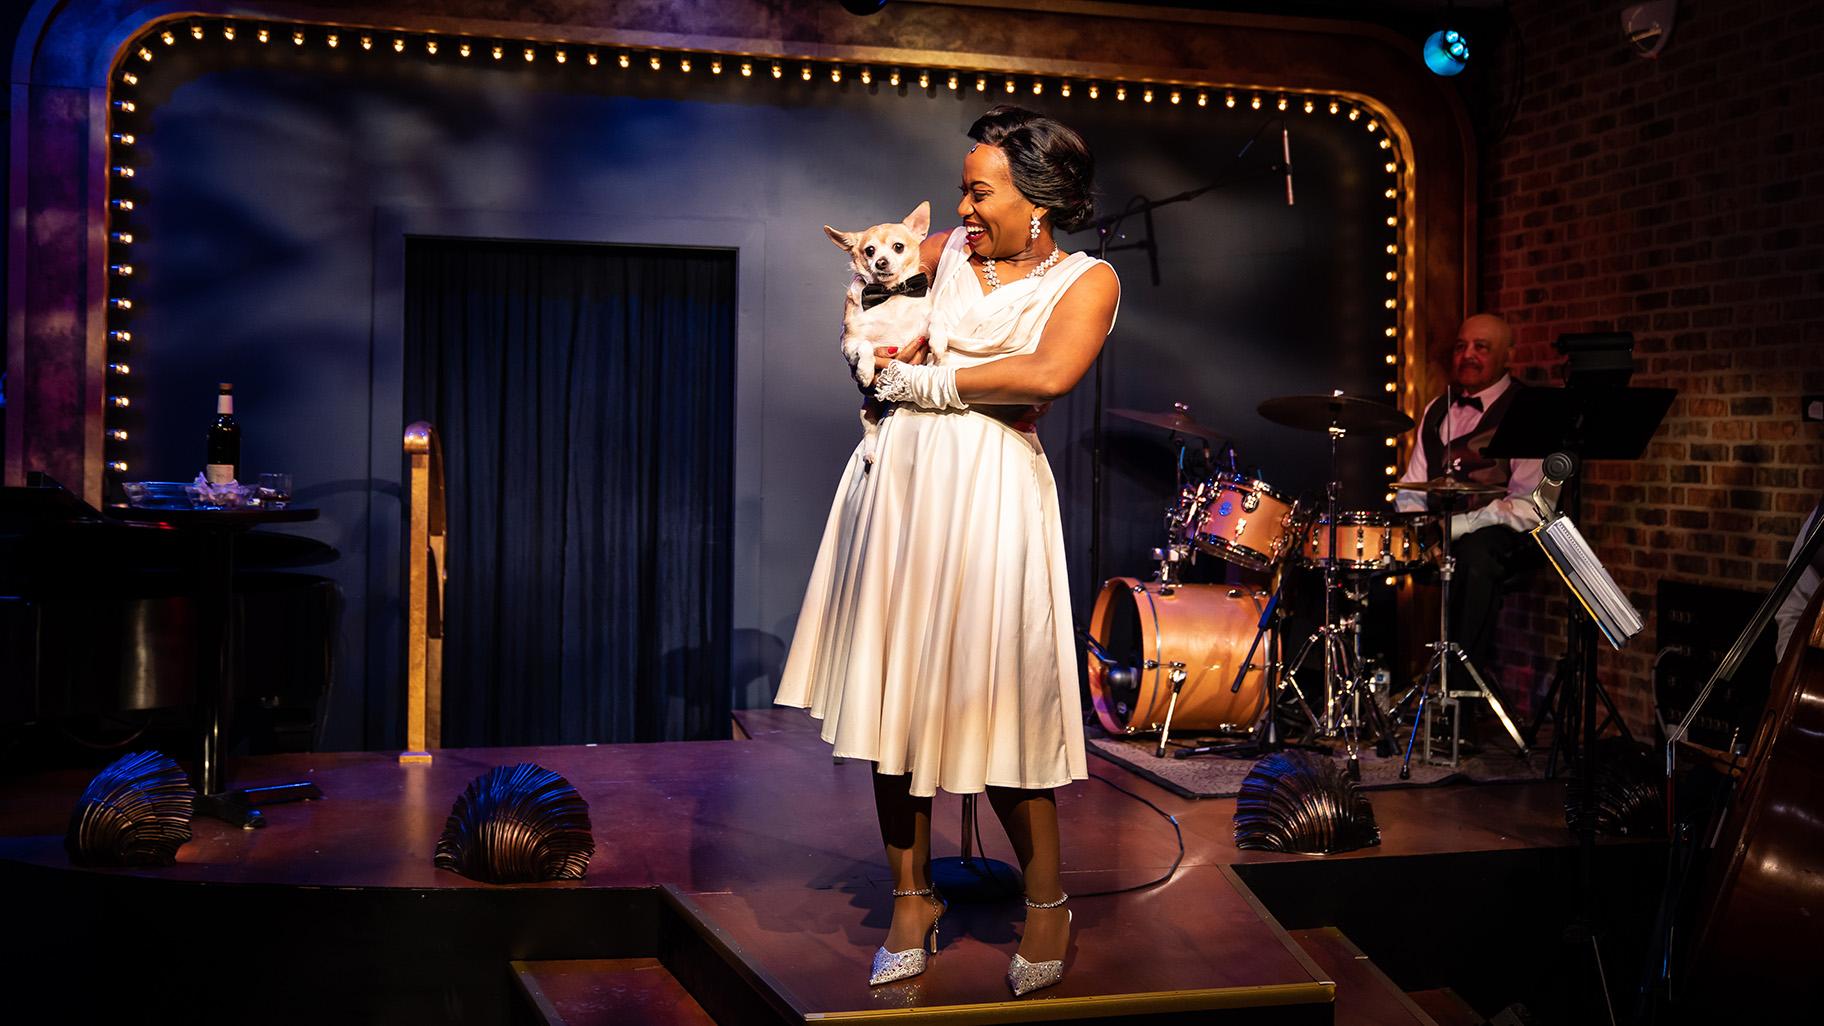 Alexis J. Roston in the Mercury Theater Chicago production of “Lady Day at Emerson’s Bar & Grill.” (Credit: Liz Lauren)